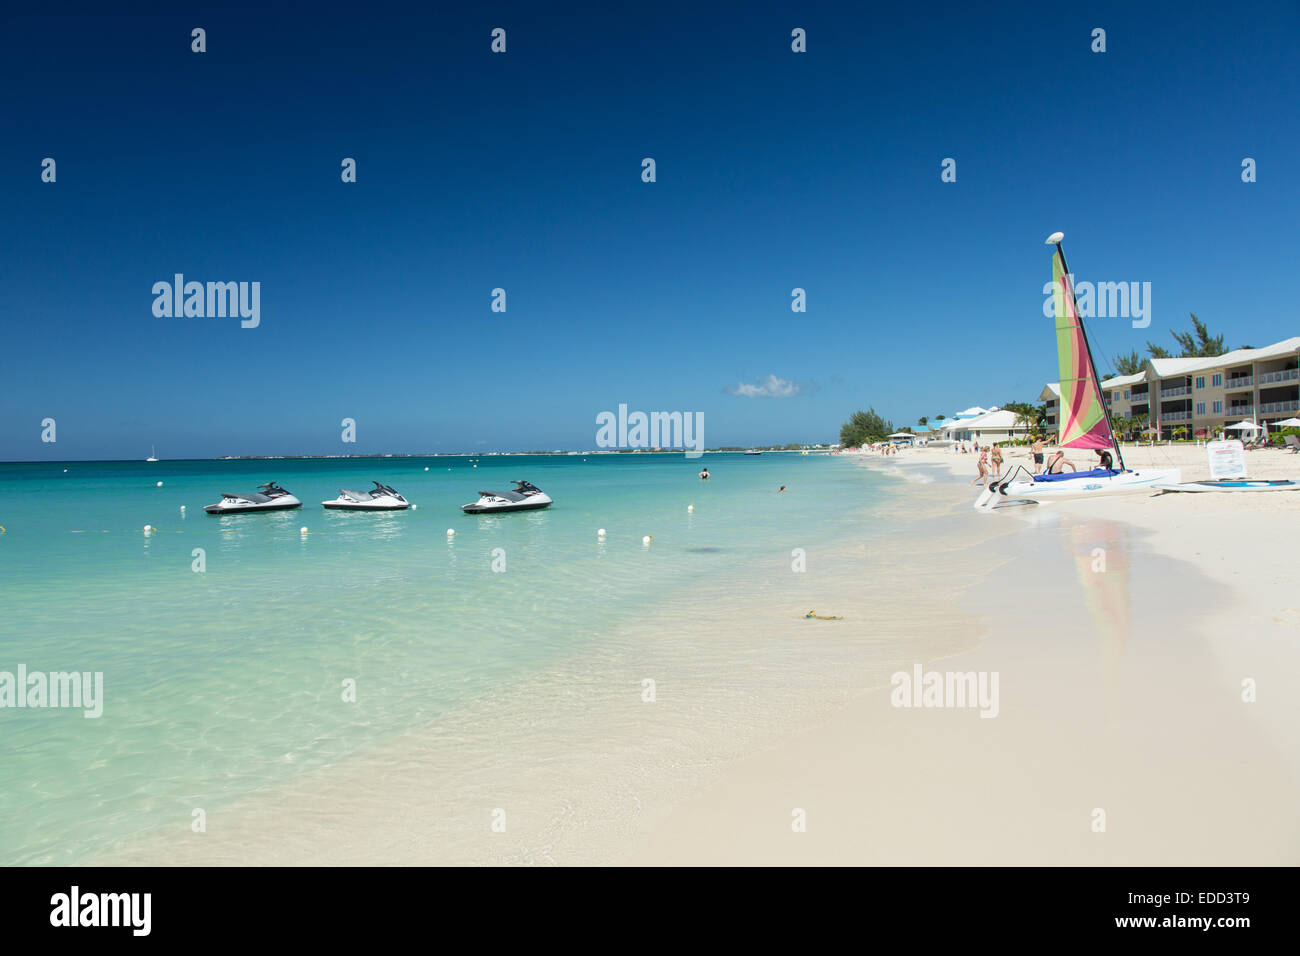 The Caribbean Ocean at Grand Cayman Island in the Cayman Islands Stock Photo